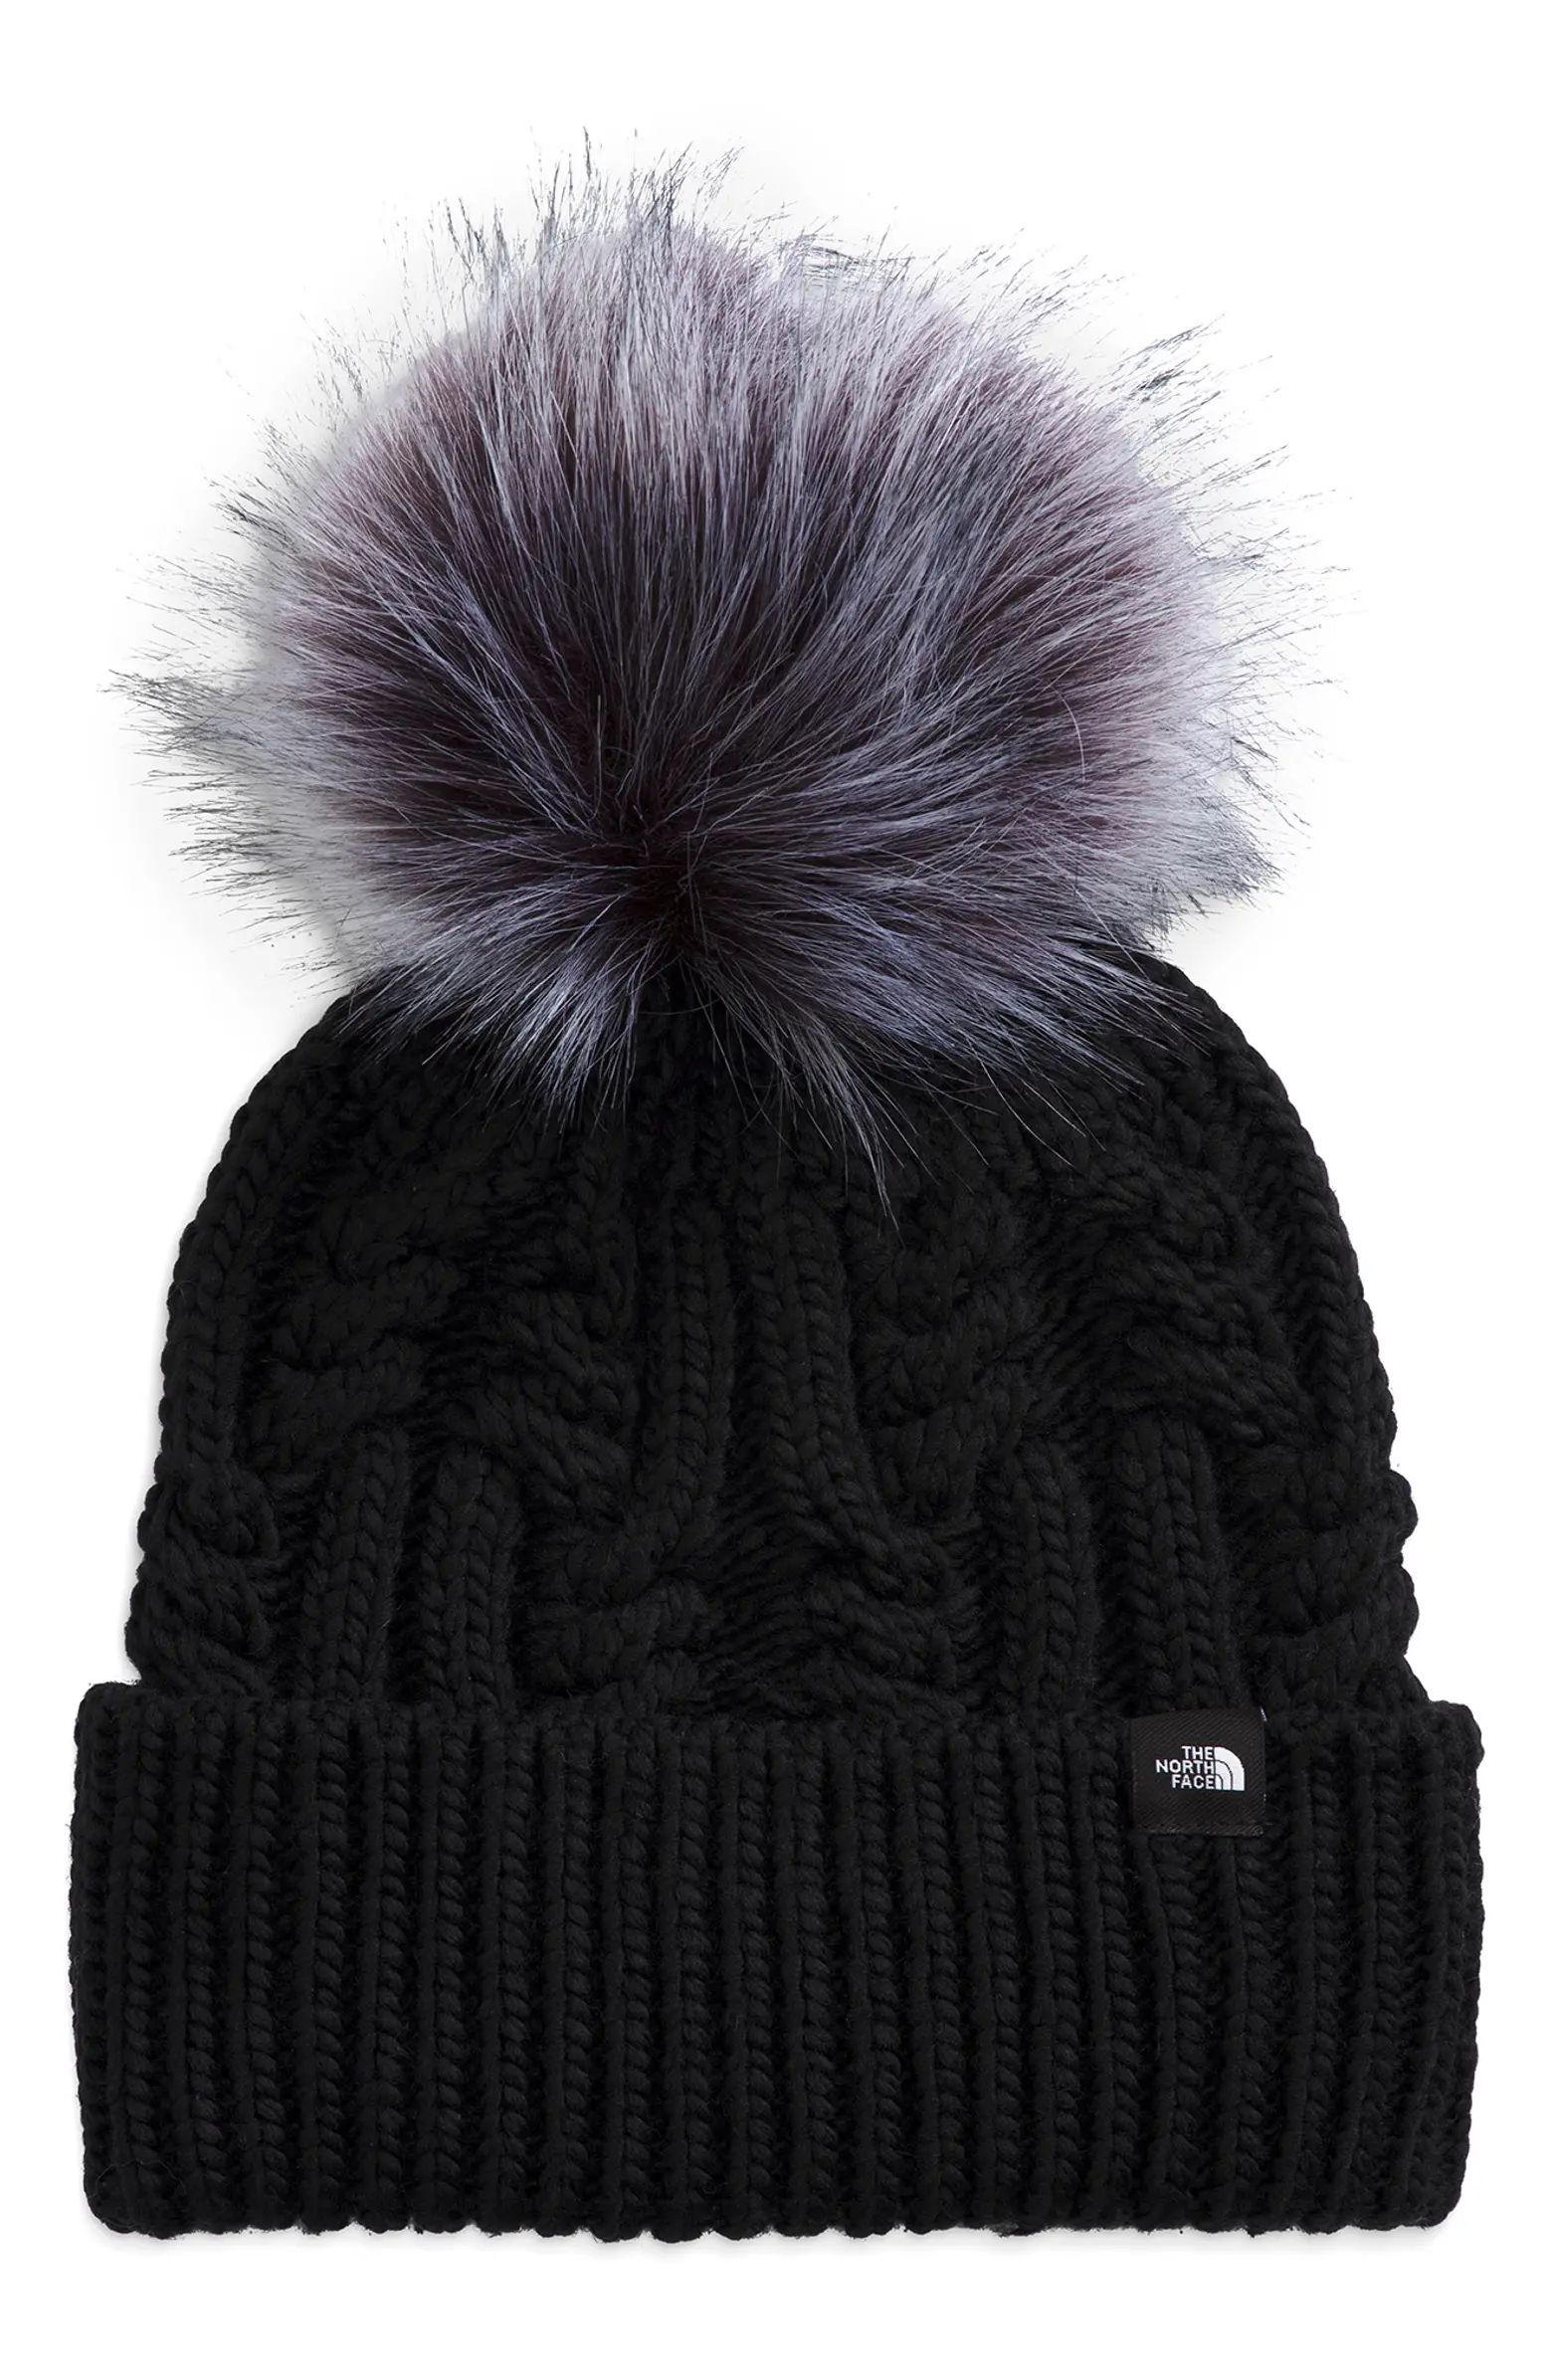 Kids Oh Mega Beanie with Faux Fur Pom | Nordstrom